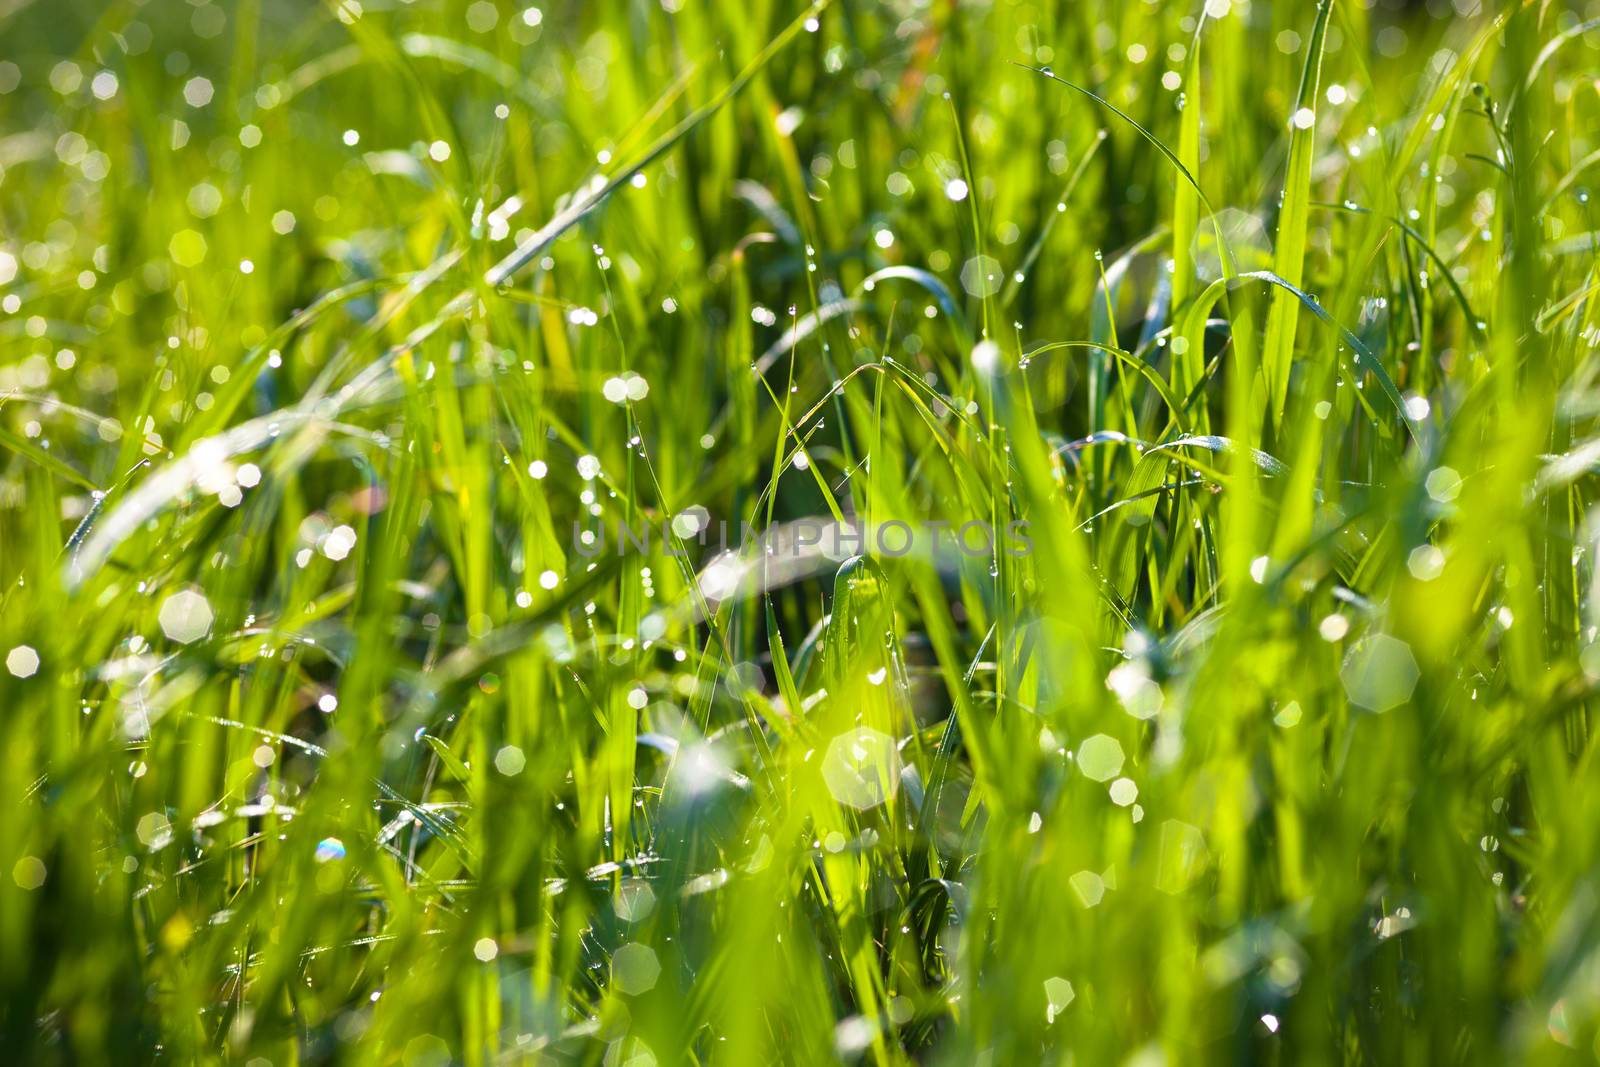 Dew drops on the green grass by rootstocks